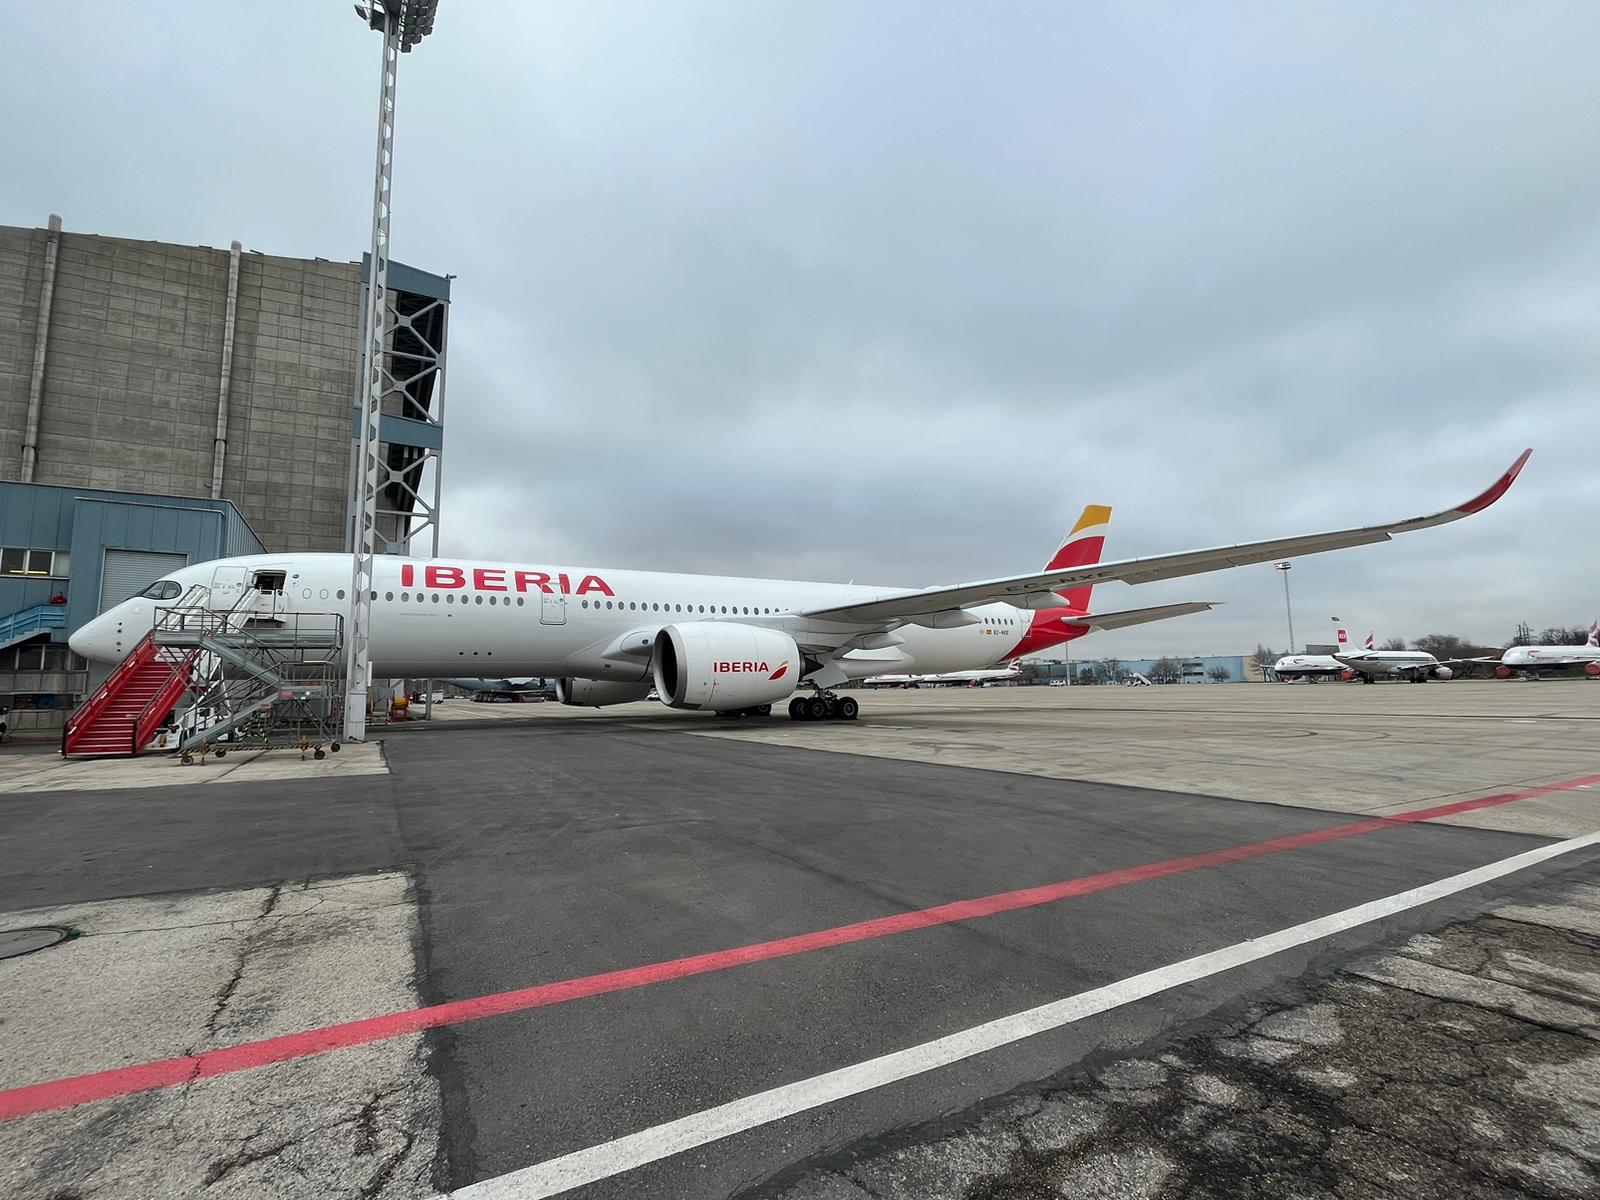 On Friday, Iberia announced its extensive plan to bolster operations within Latin America, Europe, and the U.S.